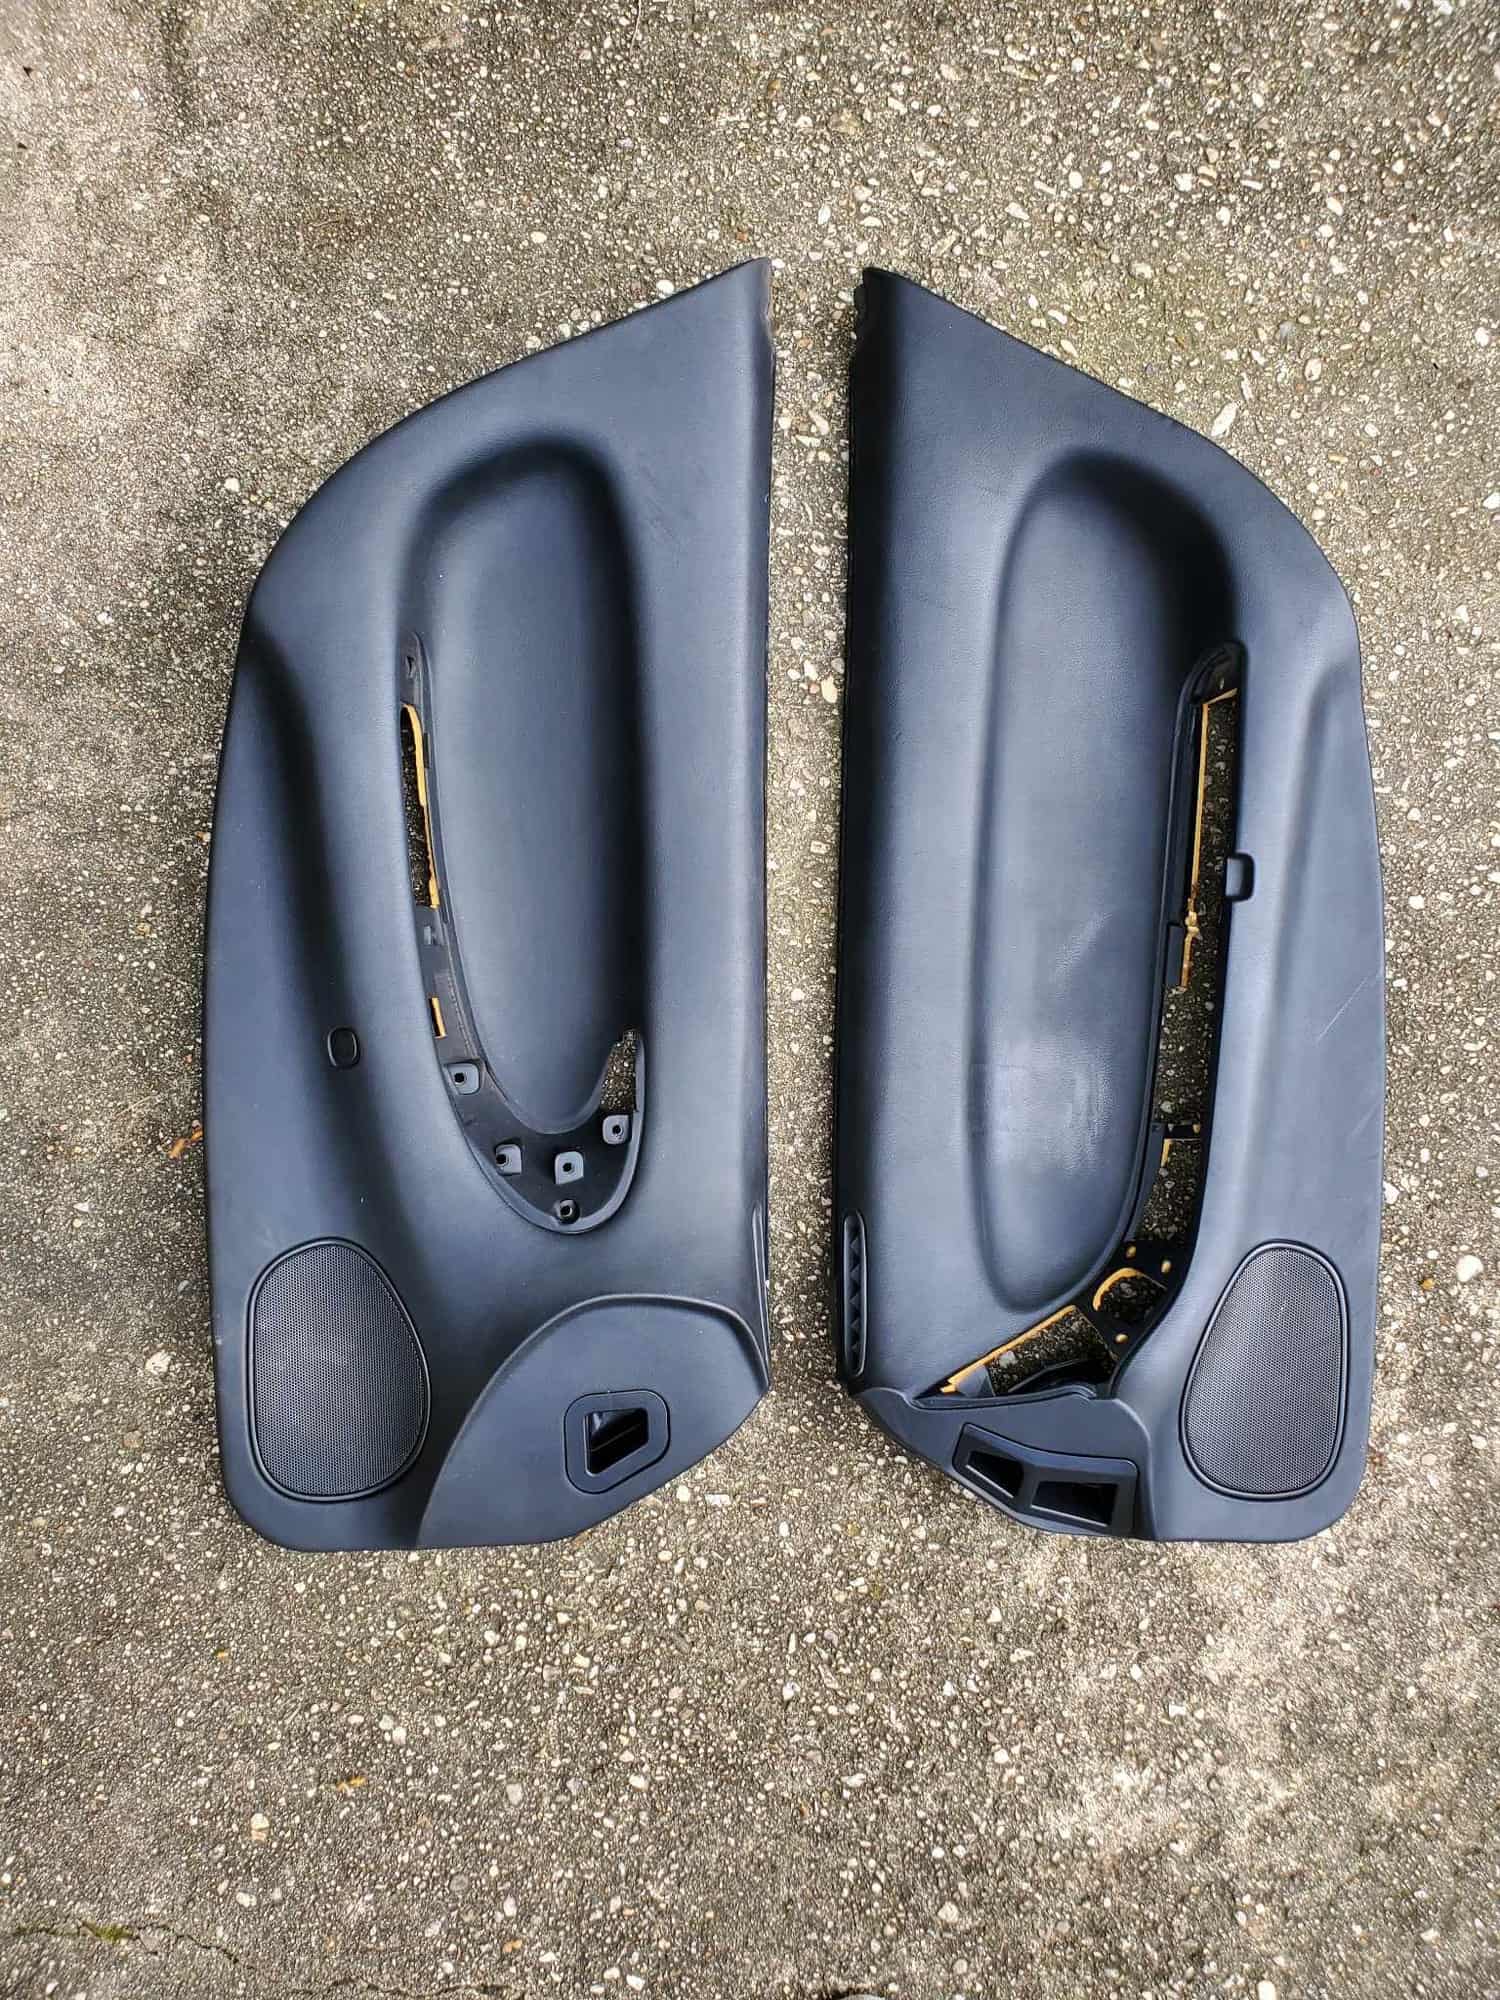 Miscellaneous - FD3S Limited Part Out - Body - Interior - Exterior - Electronics - Used - 1993 to 2002 Mazda RX-7 - Annapolis, MD 21401, United States